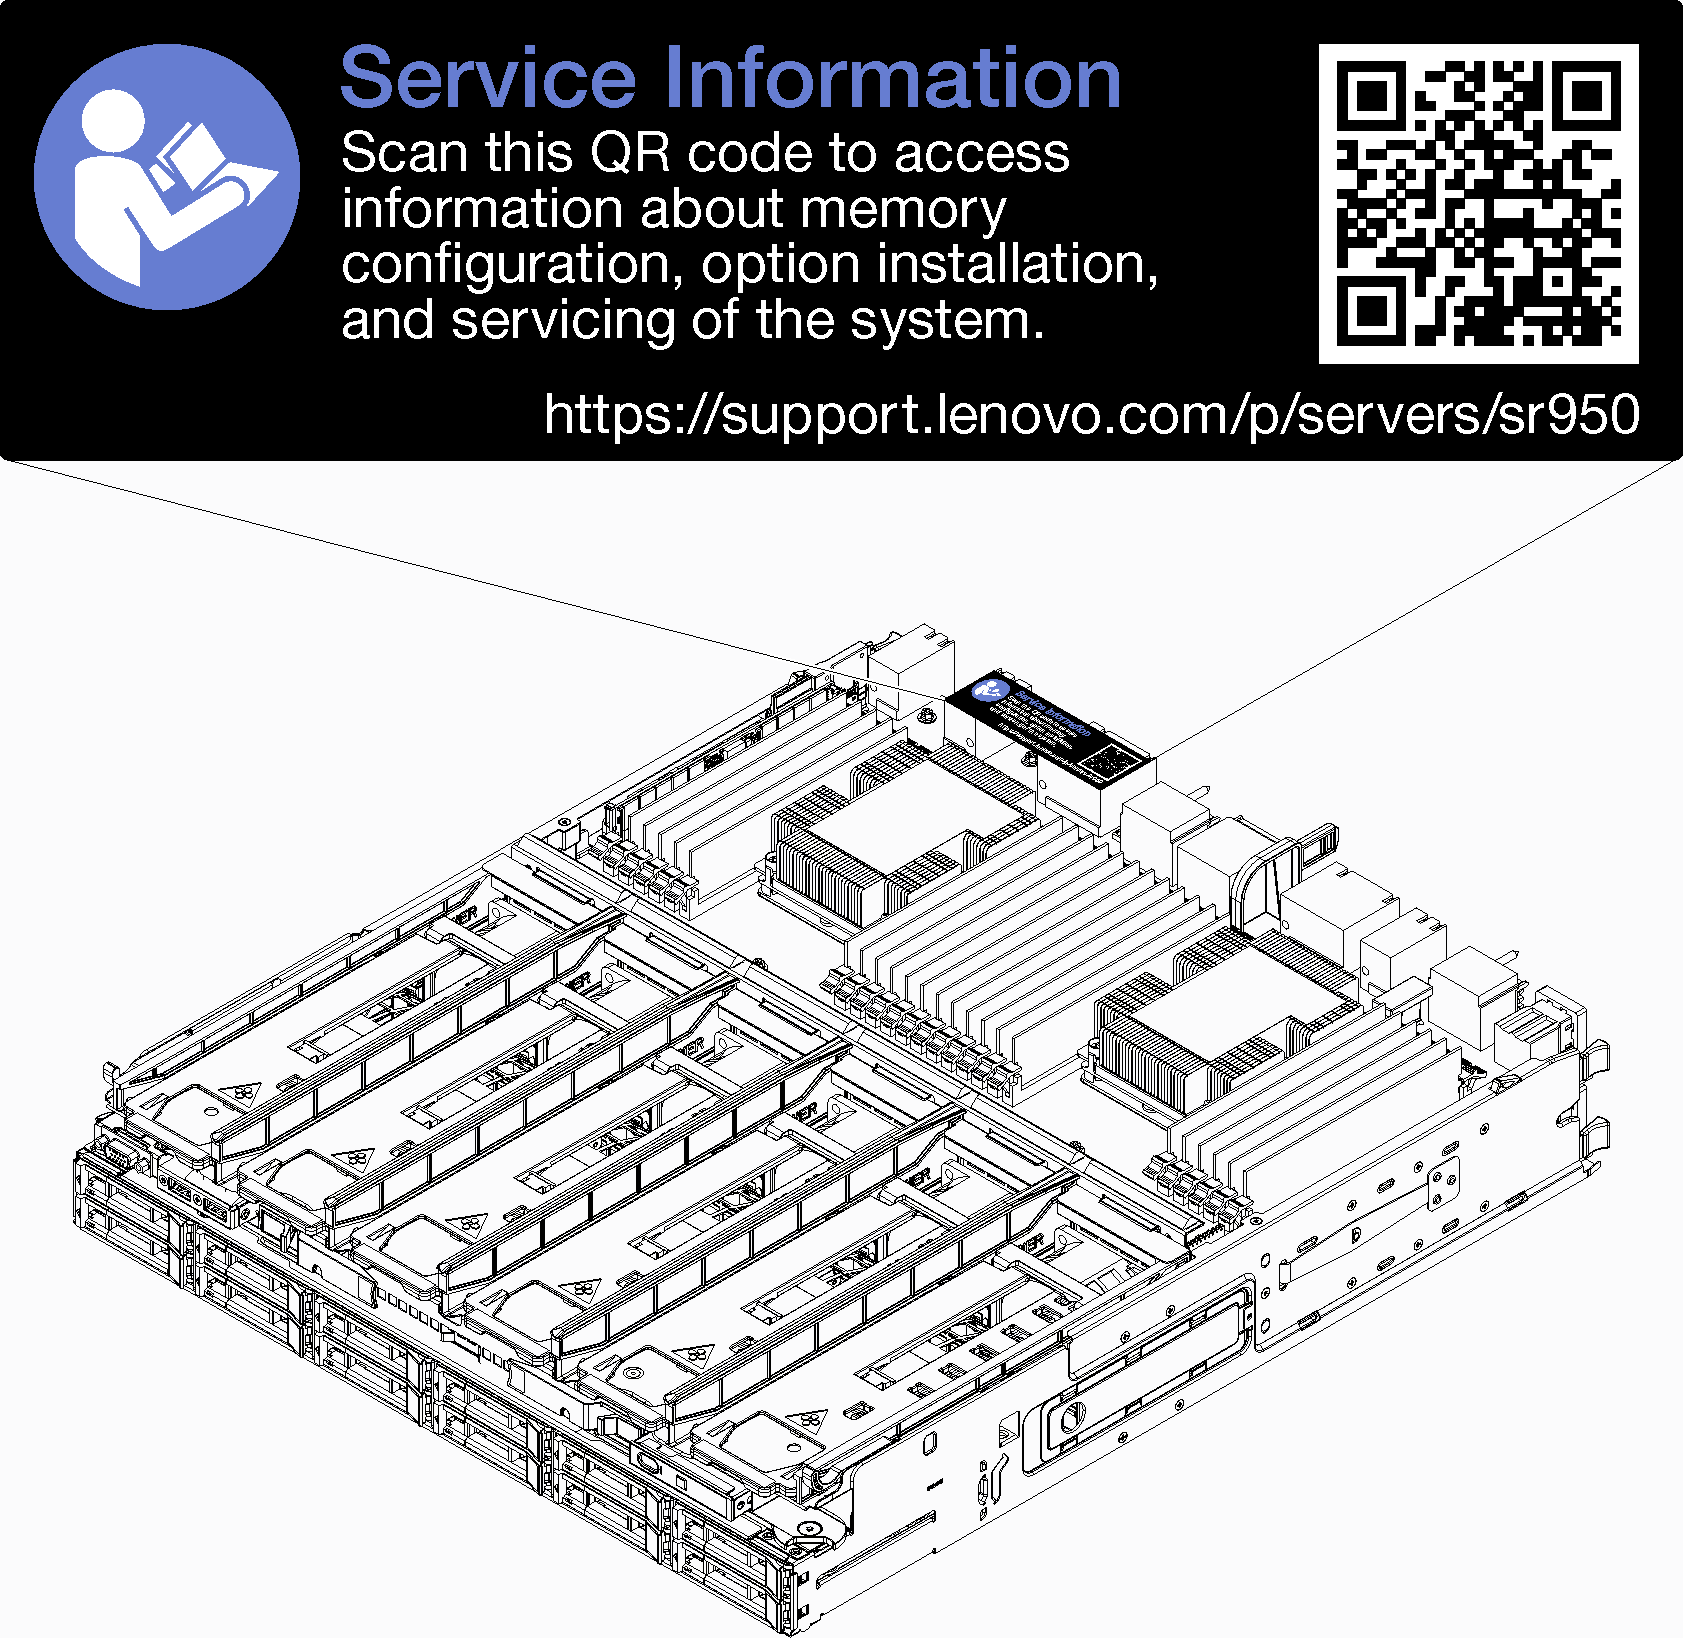 Graphic depicting the location of the service label and the QR code.